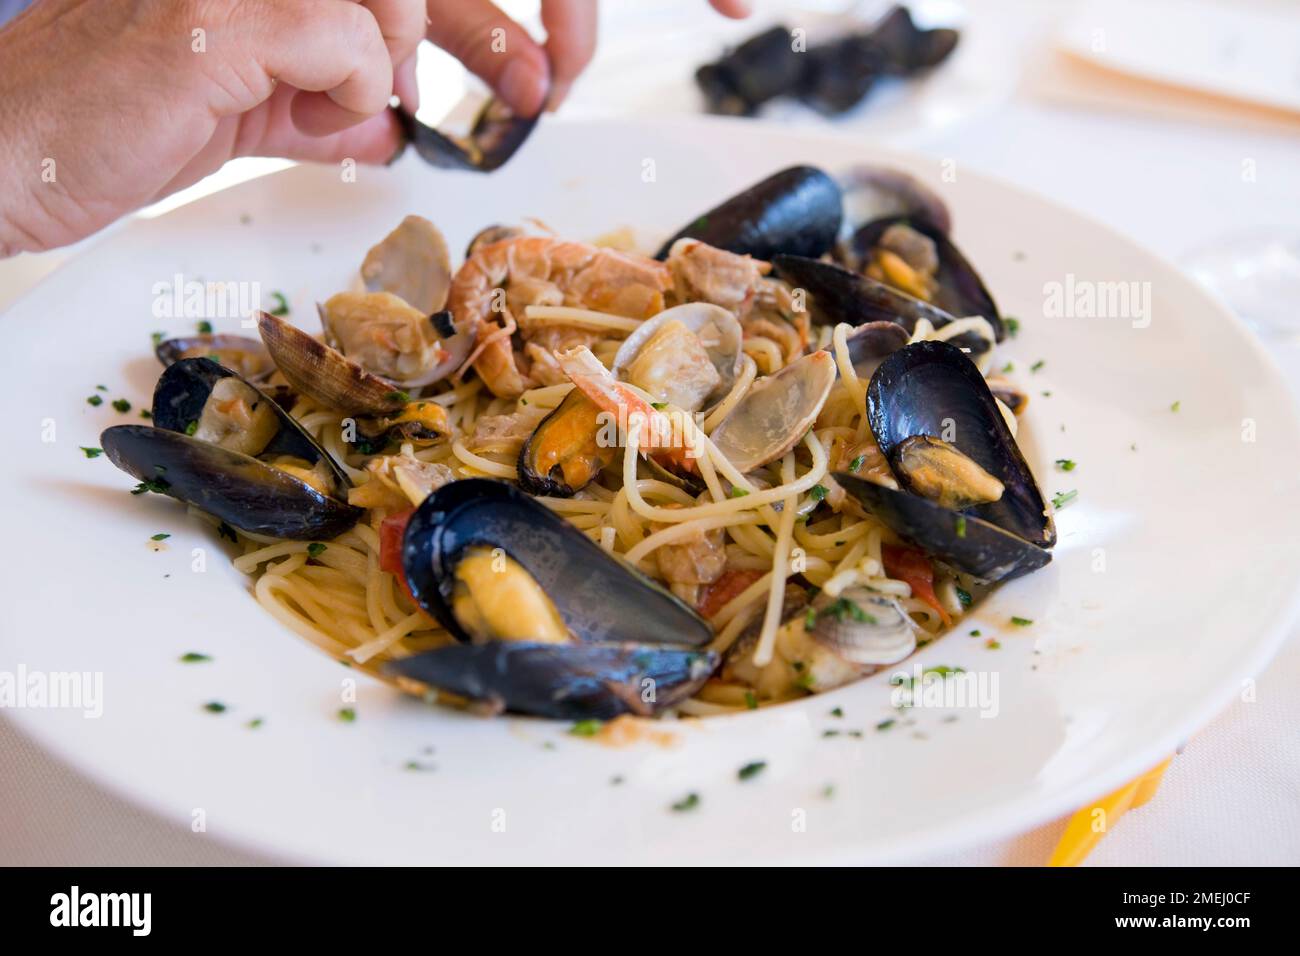 Spaghetti with mussels and vongole at a restaurant in Marano Lagunare Stock Photo